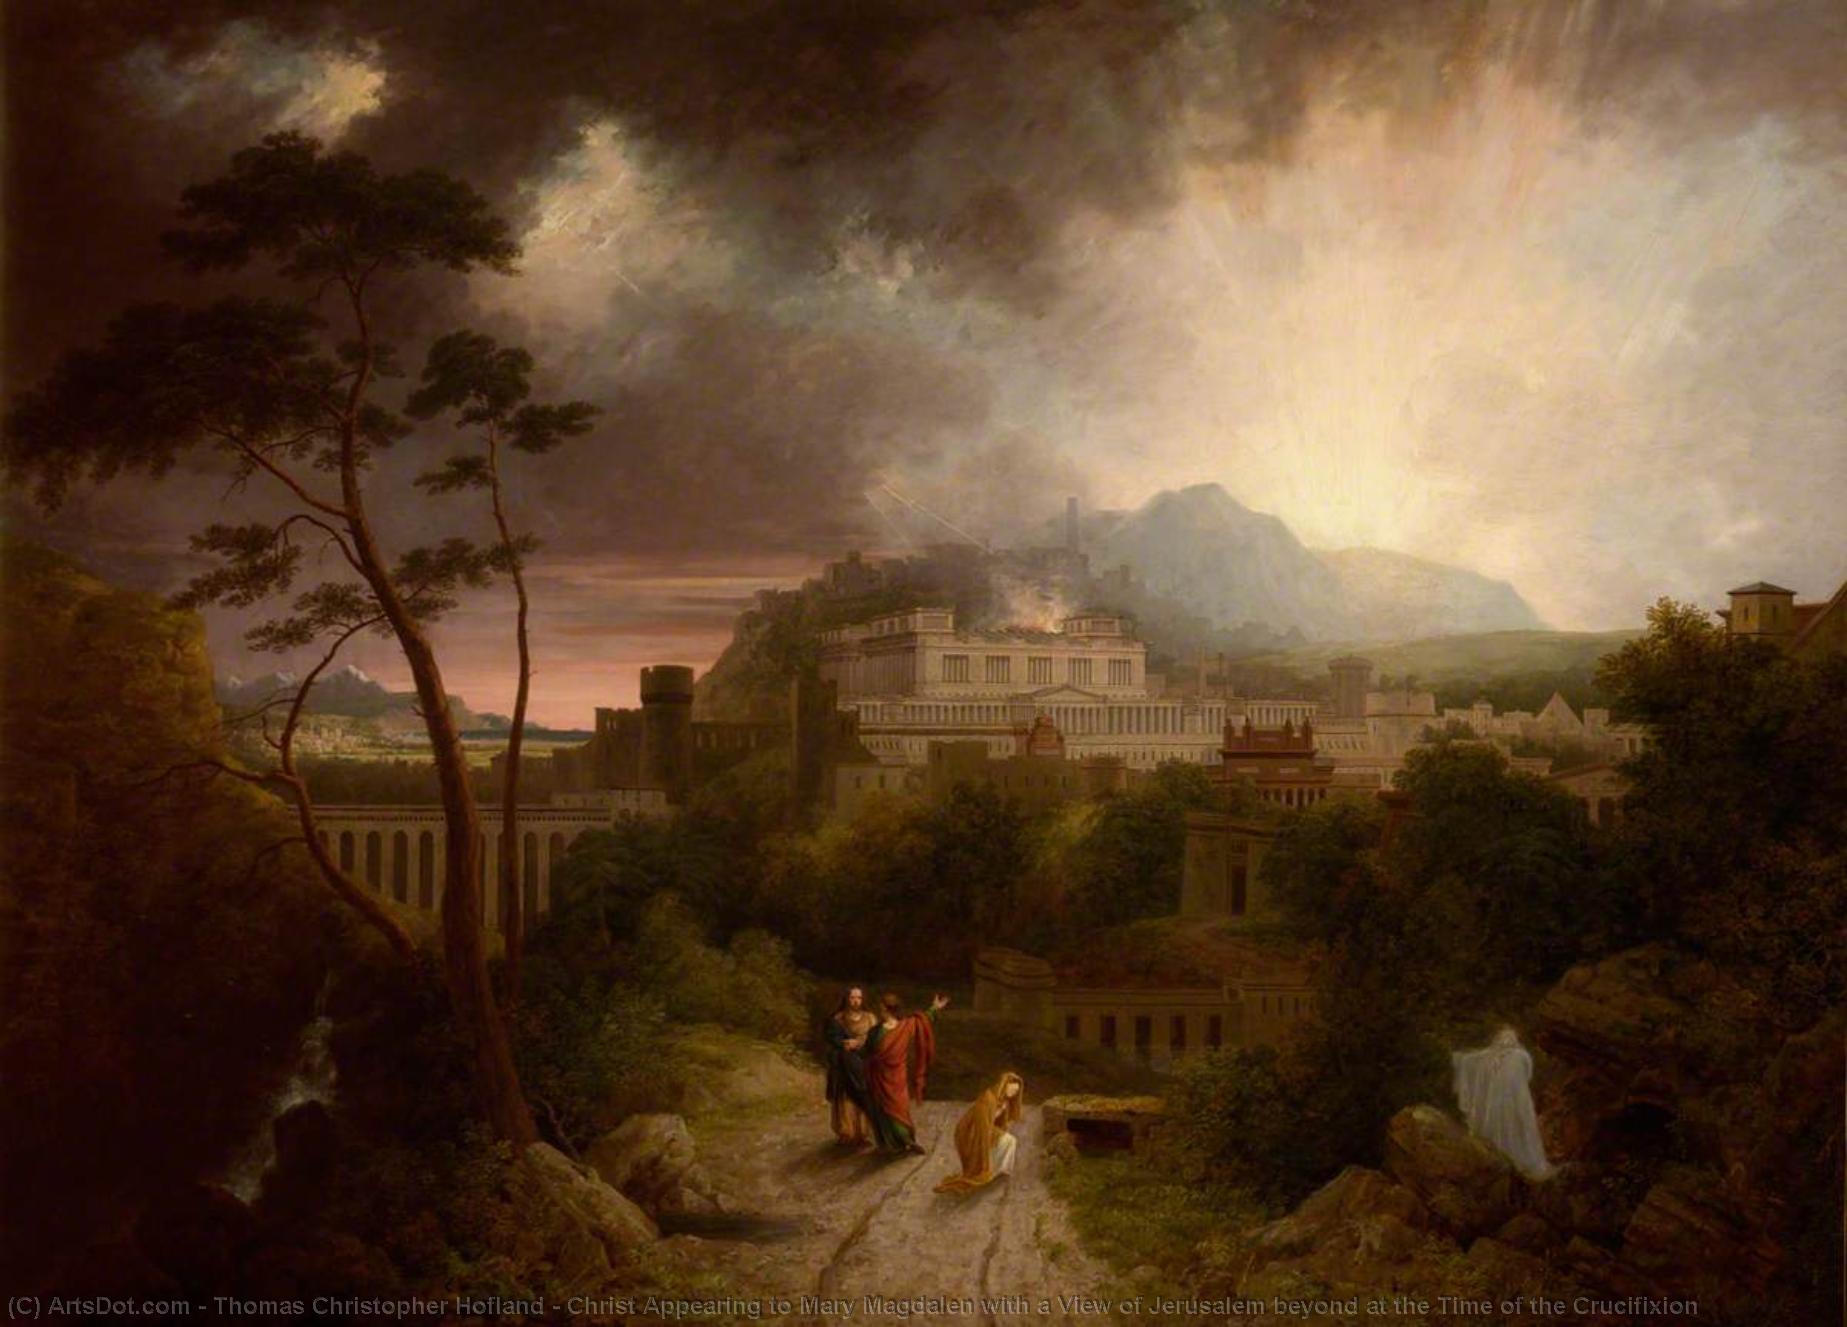 Buy Museum Art Reproductions Christ Appearing to Mary Magdalen with a View of Jerusalem beyond at the Time of the Crucifixion by Thomas Christopher Hofland (1777-1843) | ArtsDot.com